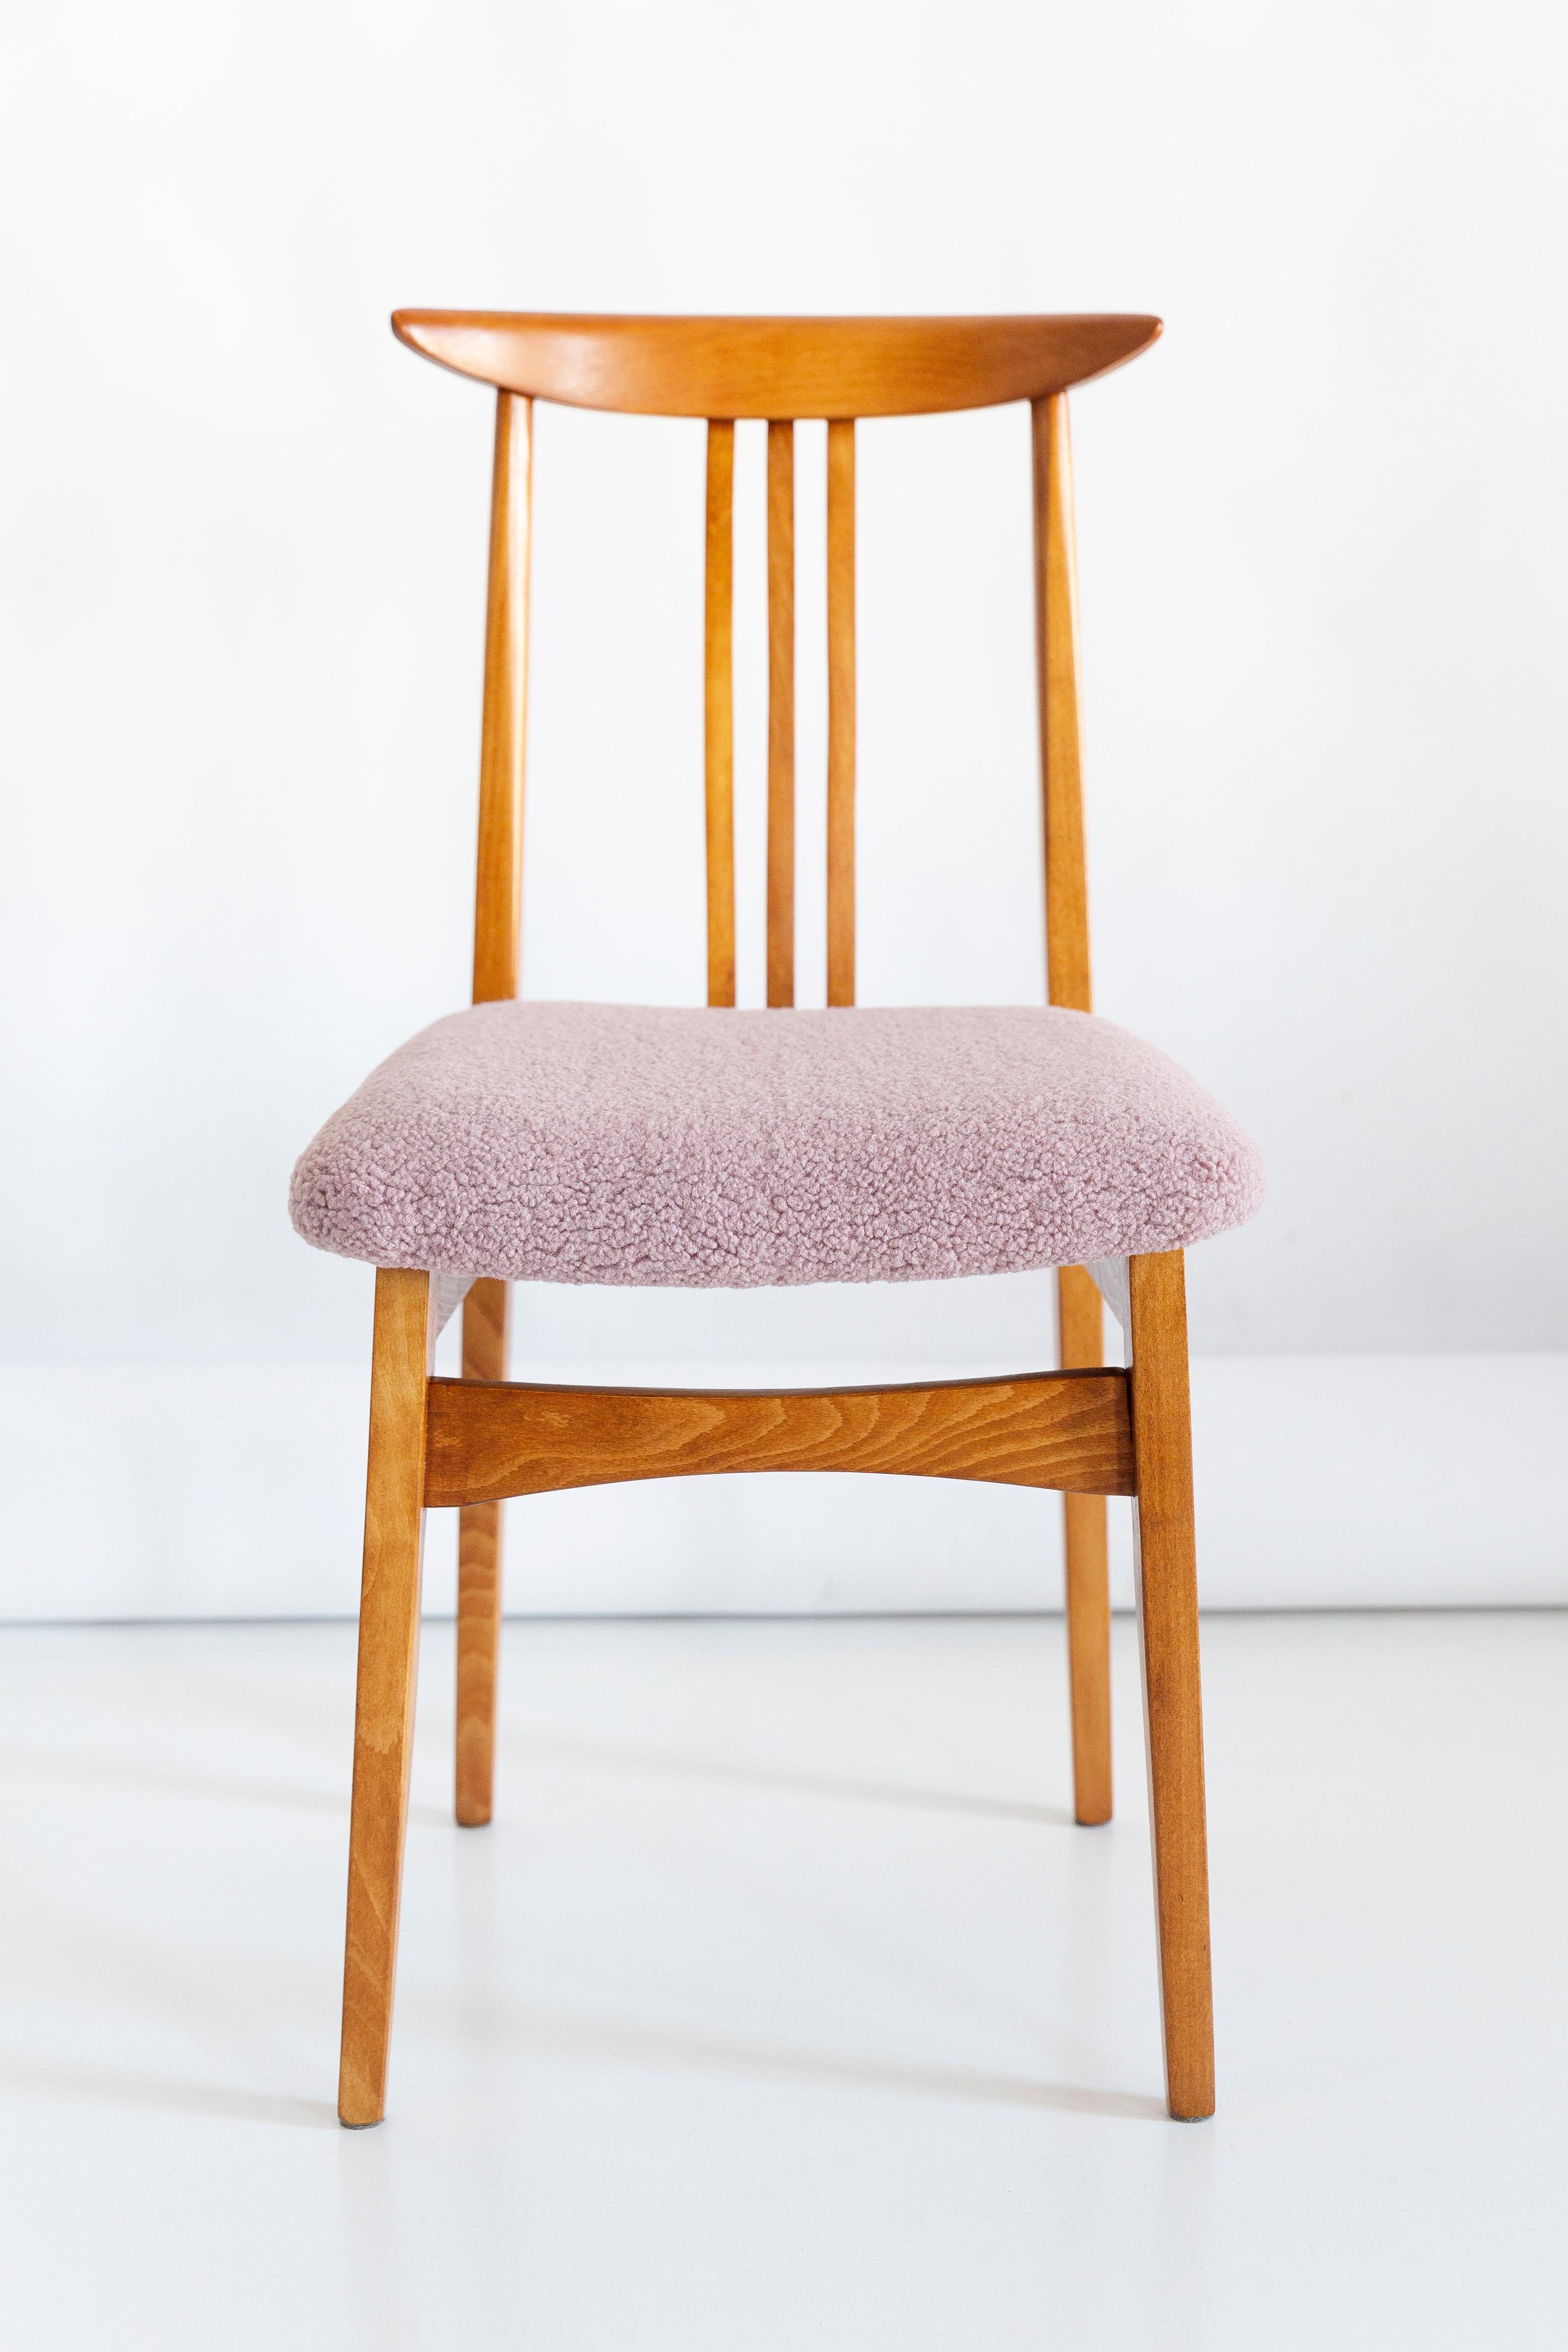 Mid-Century Modern Pink Boucle Chair, Designed by M. Zielinski, Europe, 1960s For Sale 6